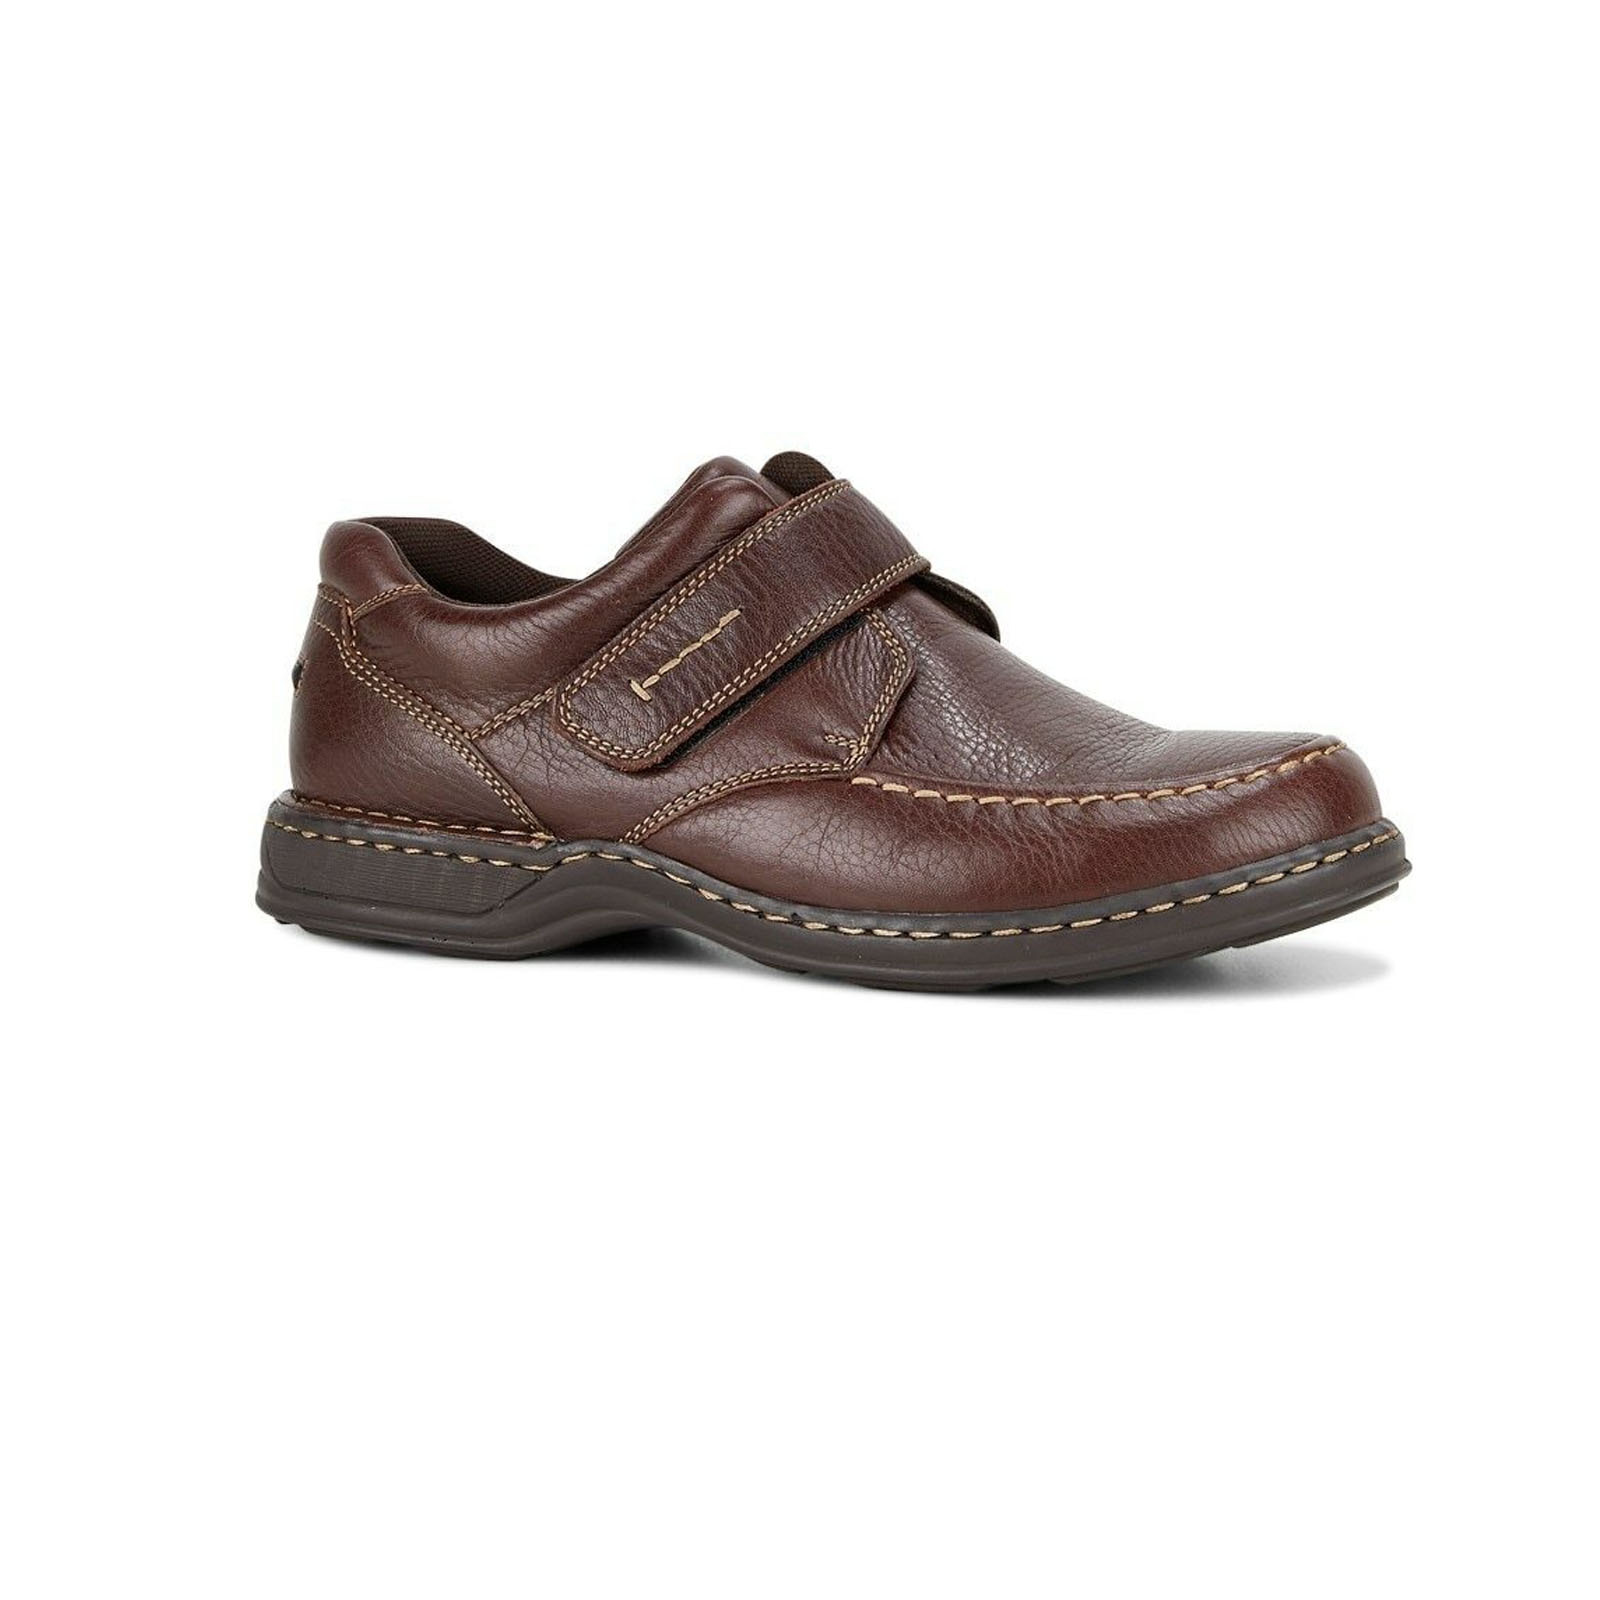 HUSH,PUPPIES Men's Roger Slip On w Strap Extra Wide Leather Shoes - Brown